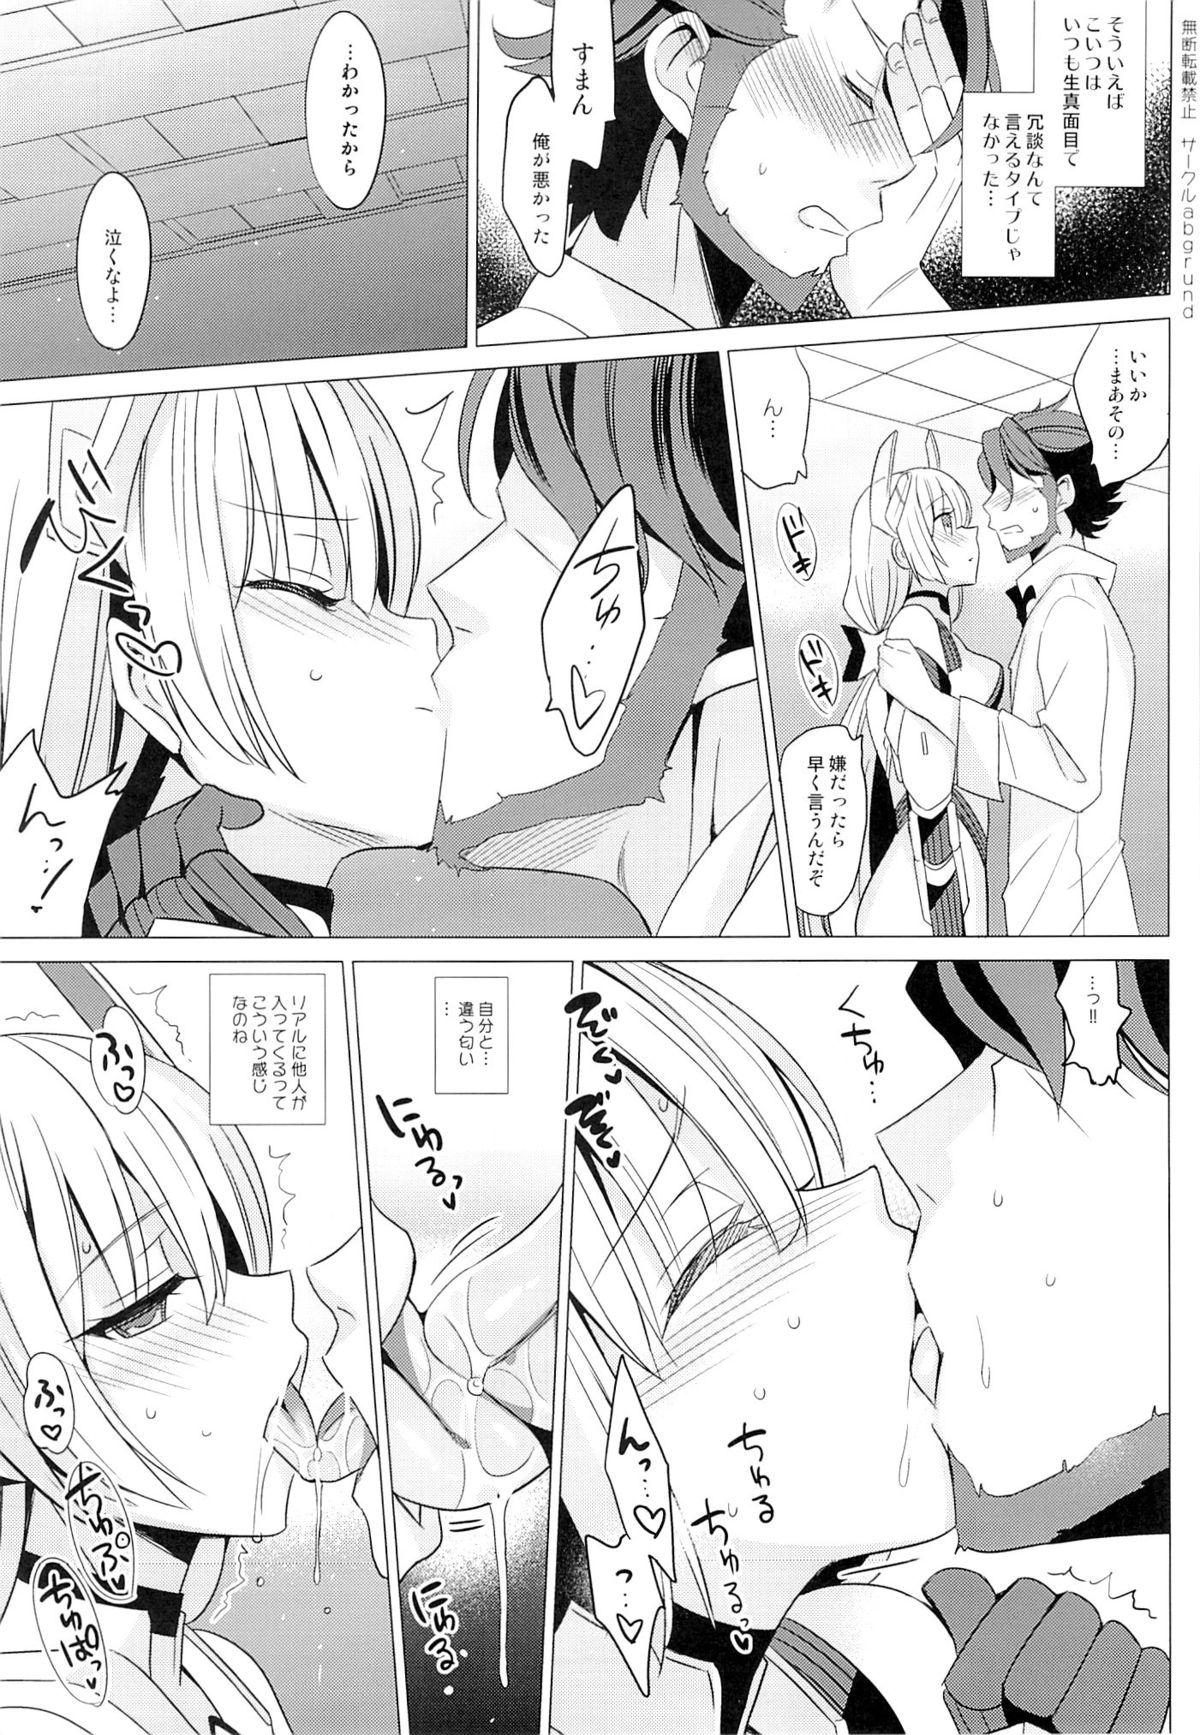 Chicks Rakuen e Youkoso - Expelled from paradise Awesome - Page 6